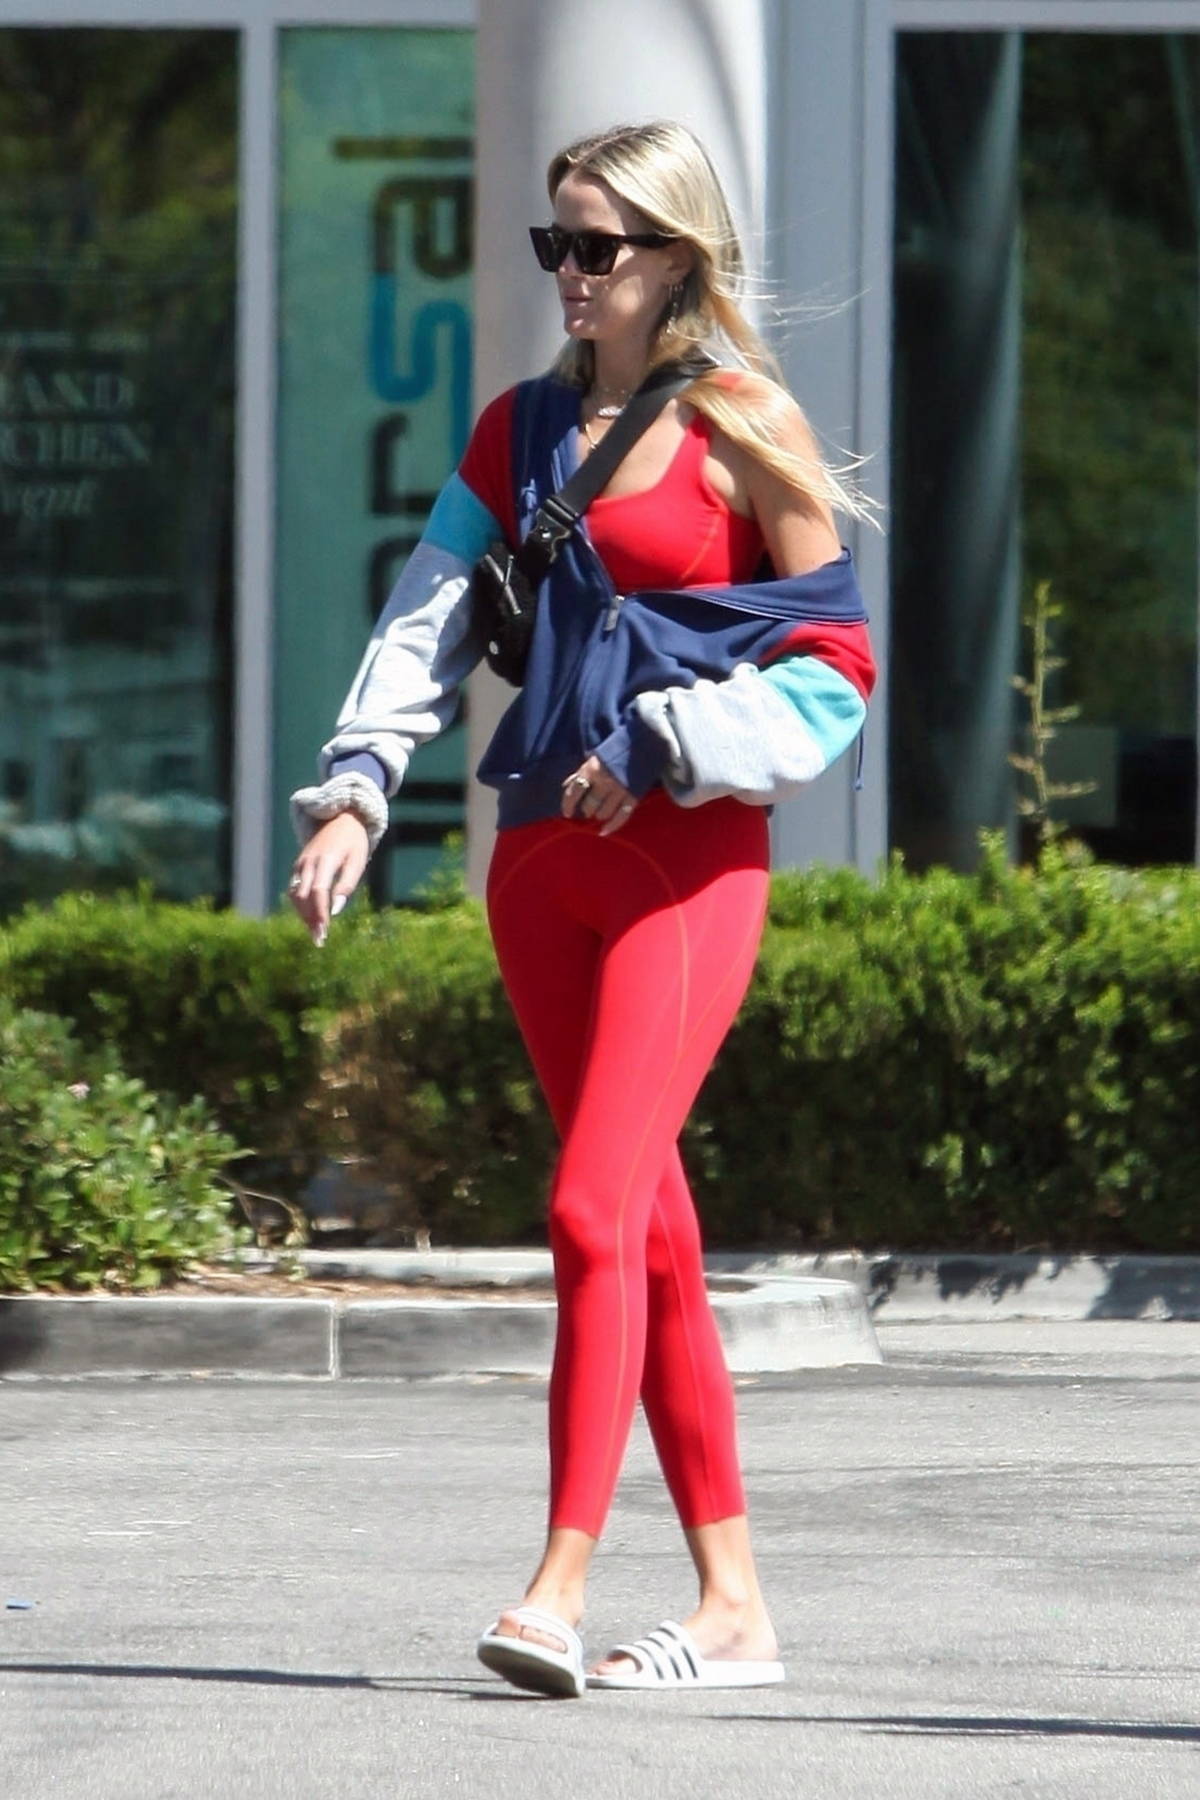 https://www.celebsfirst.com/wp-content/uploads/2022/06/ava-phillippe-looks-great-in-a-red-sports-bra-and-leggings-while-out-for-lunch-with-a-friend-in-los-angeles-260622_4.jpg